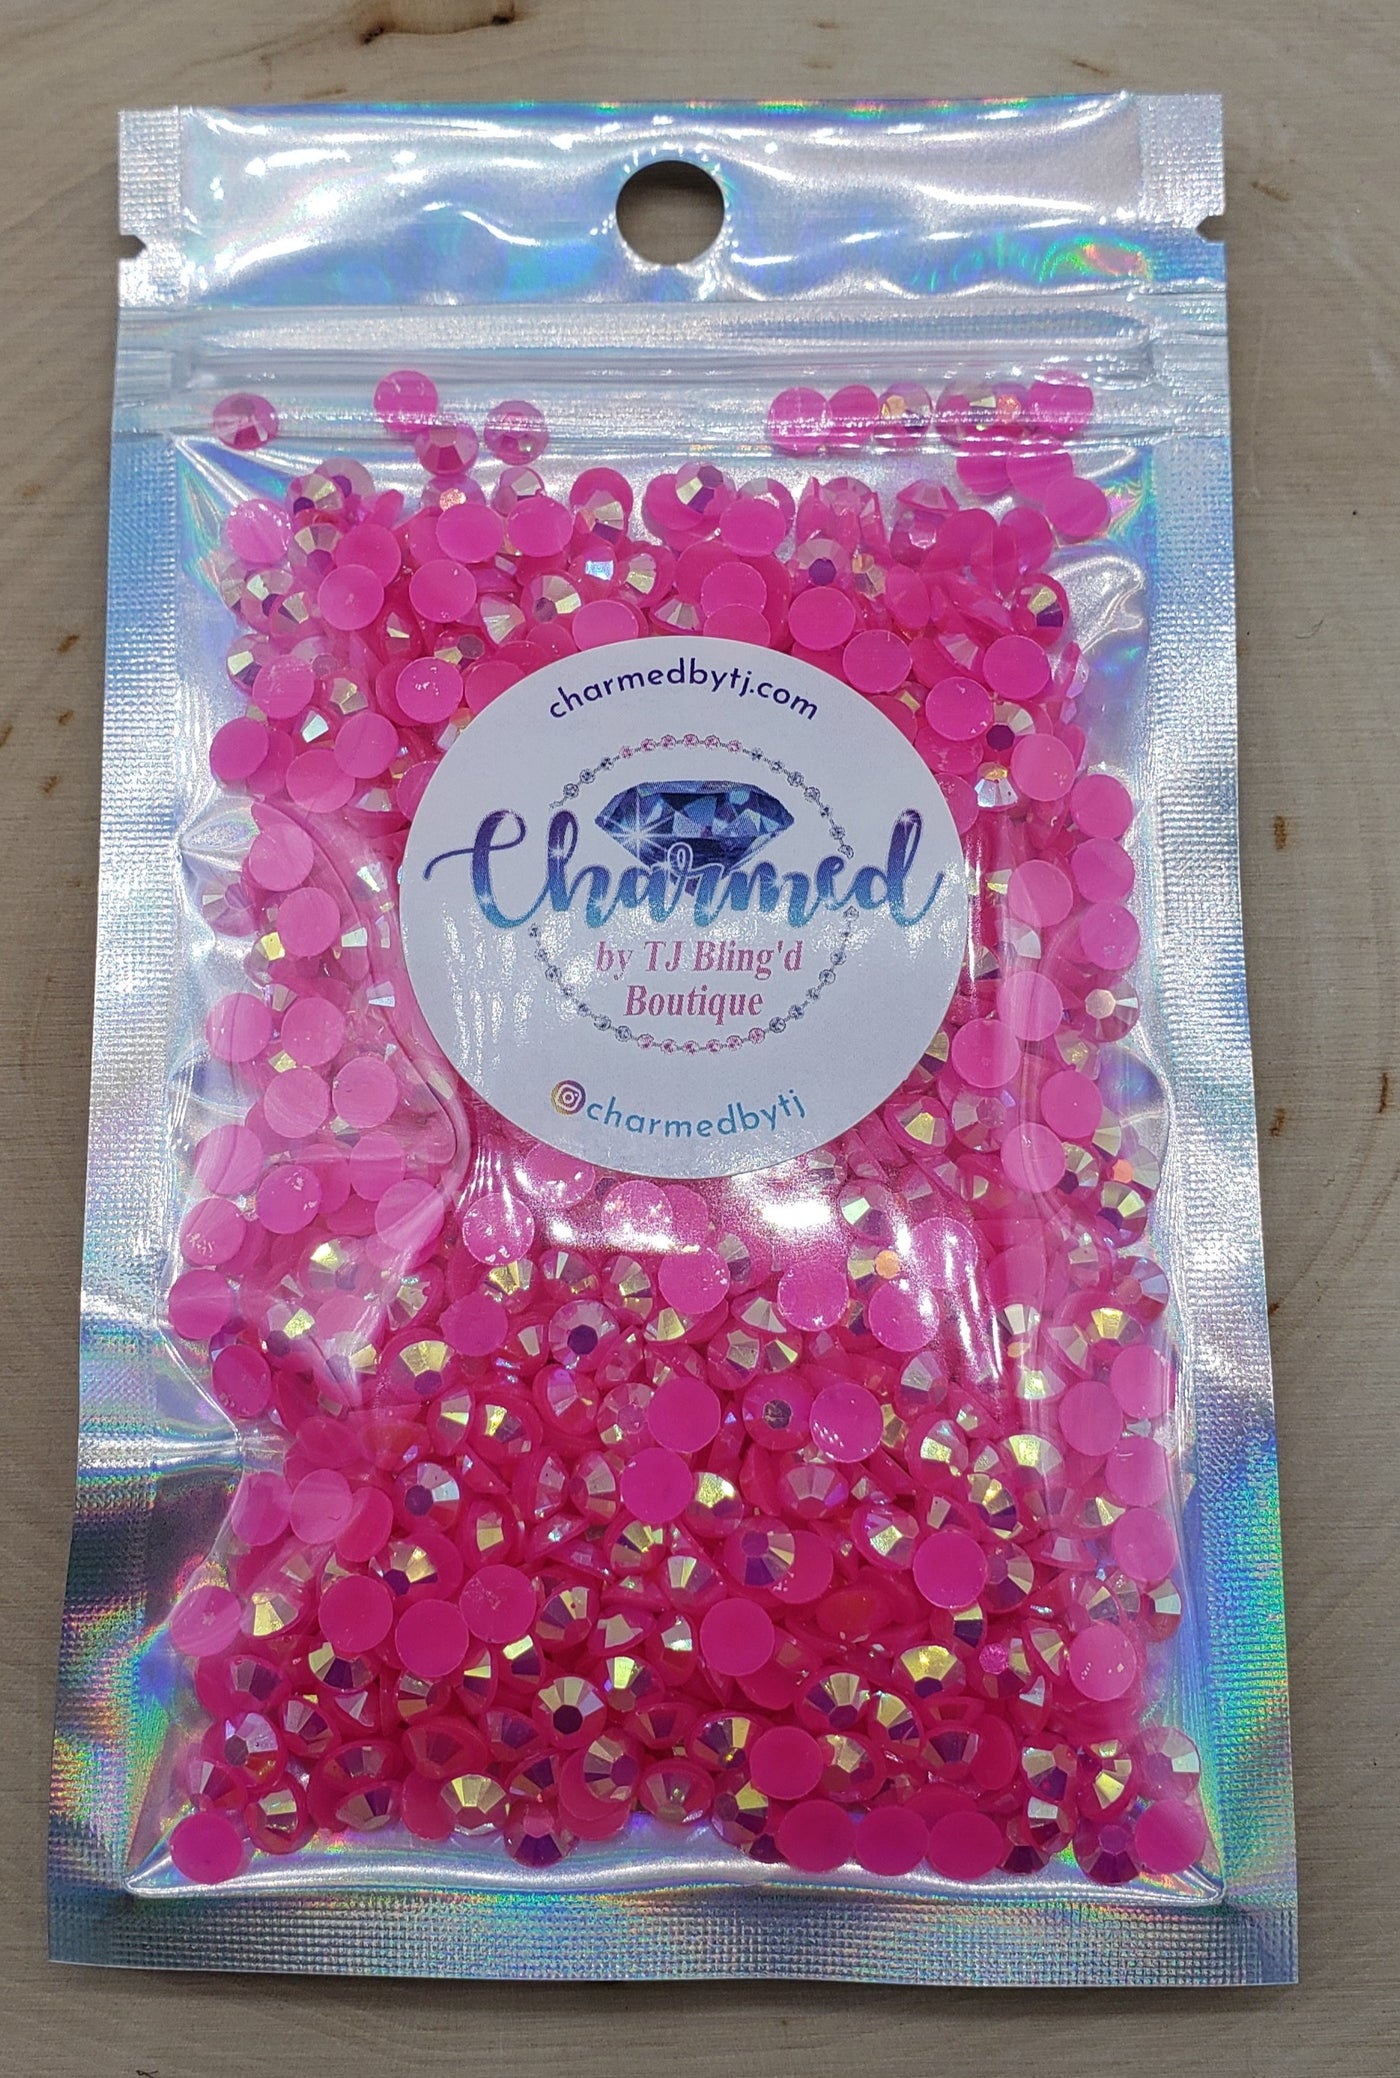 Hot Pink AB Jelly (Resin) Rhinestones - Charmed By TJ